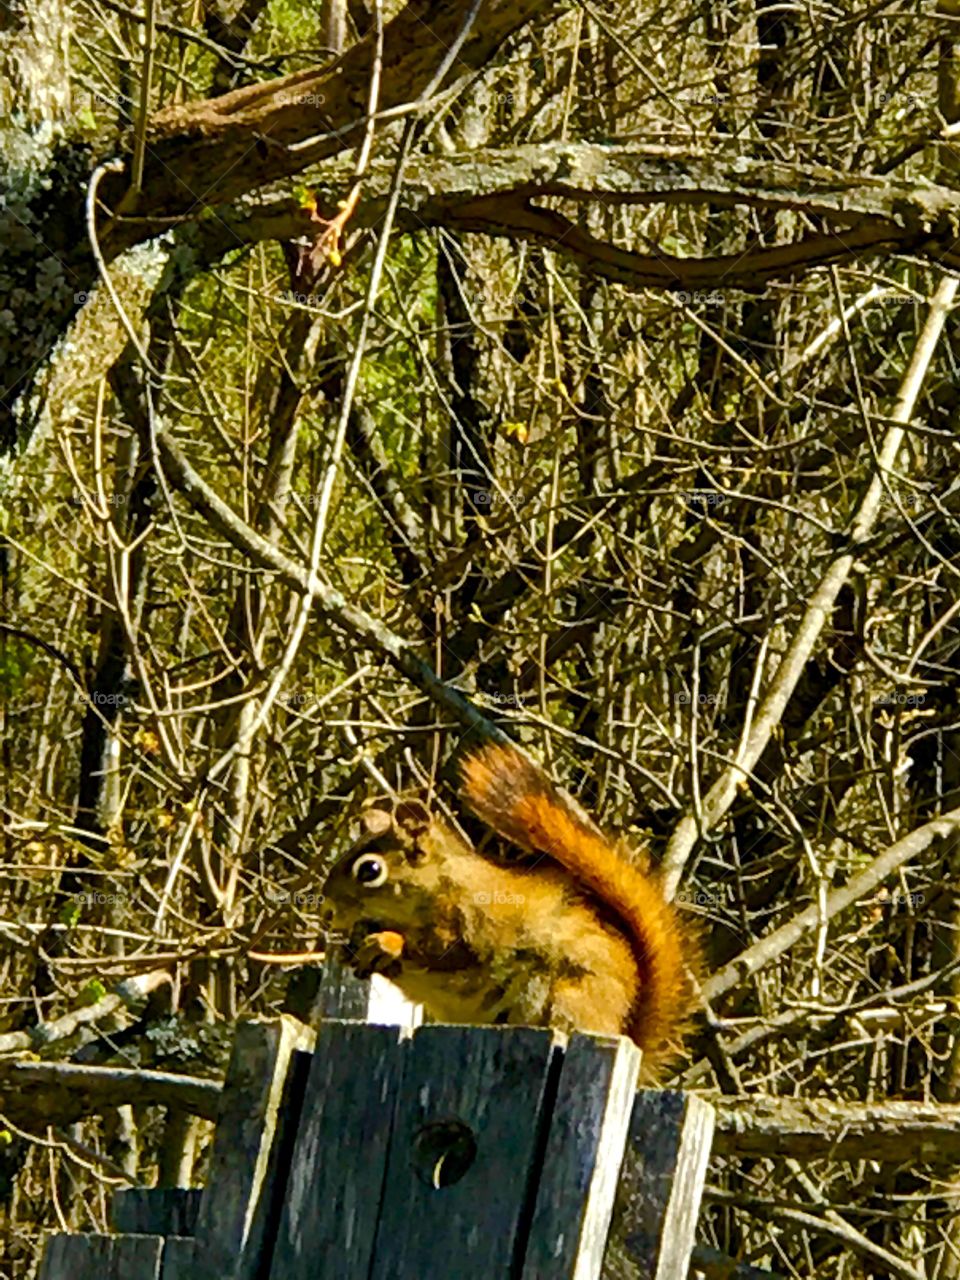 Squirrel’s snack time